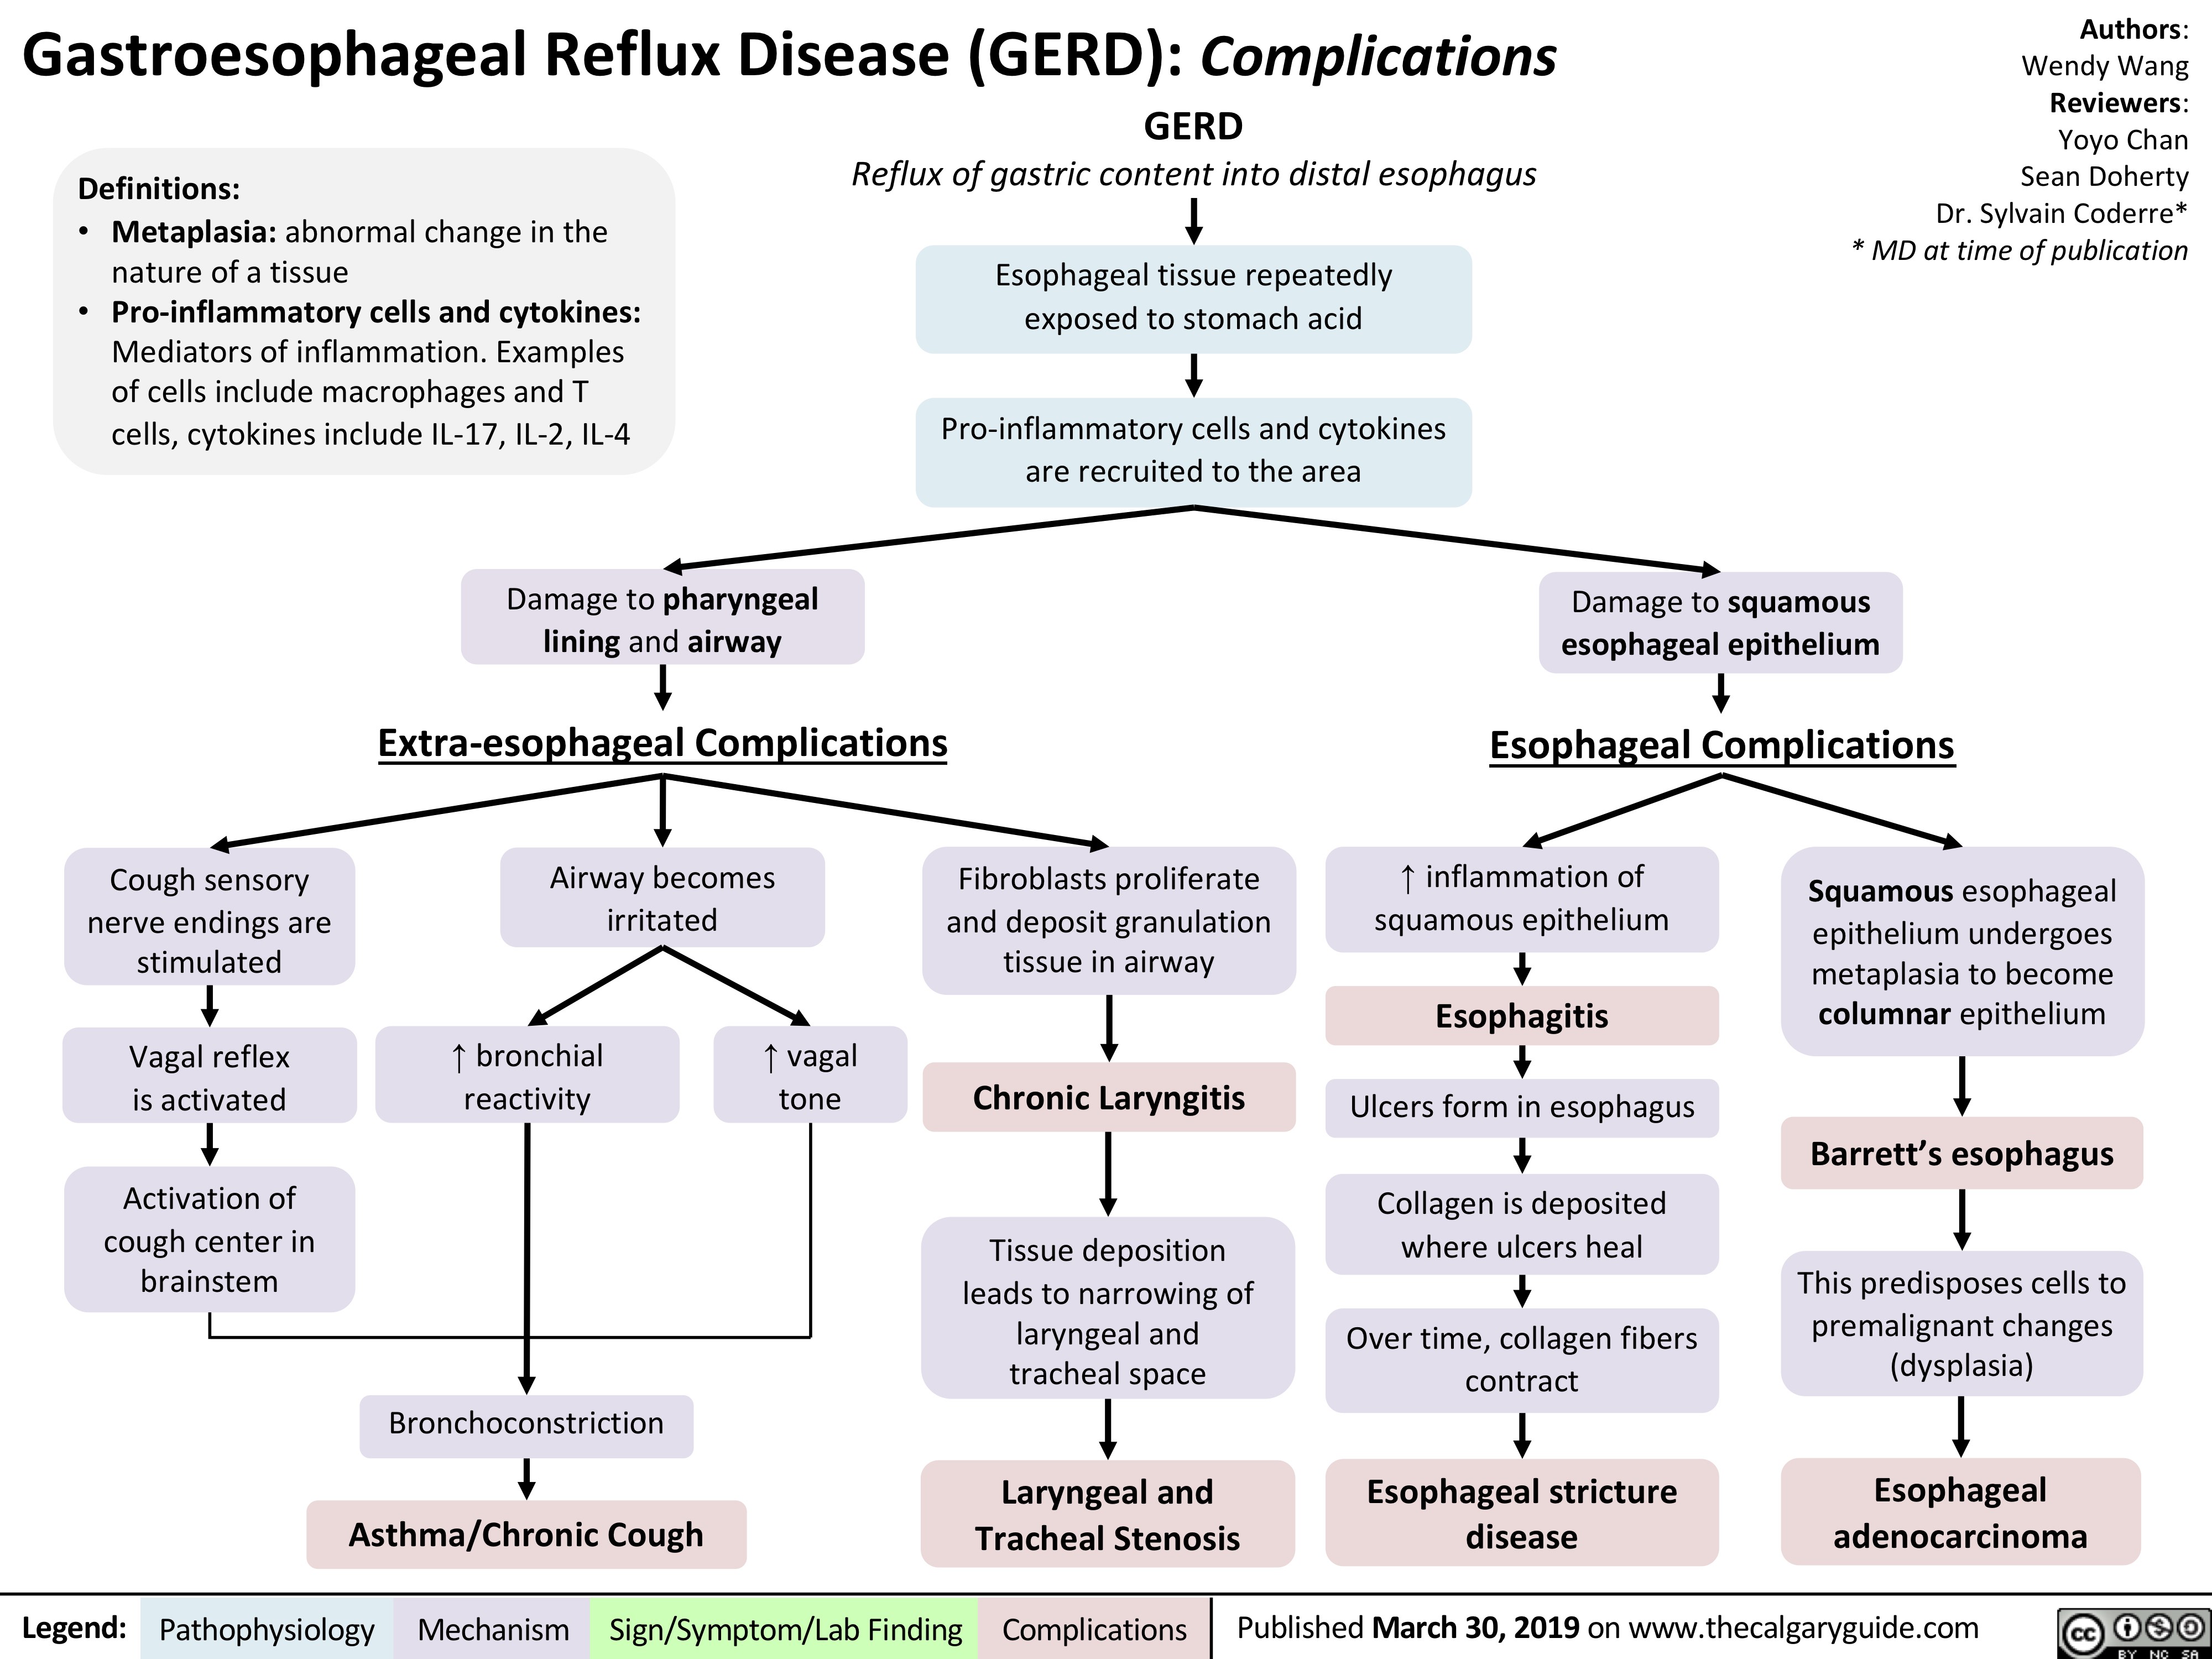 Gastroesophageal Reflux Disease (GERD): Complications
Esophageal stricture
disease
Esophagitis
Esophageal
adenocarcinoma
Barrett’s esophagus
GERD
Reflux of gastric content into distal esophagus
Damage to squamous
esophageal epithelium
Legend: Published March 30, 2019 on www.Pathophysiology Mechanism Sign/Symptom/Lab Finding Complications thecalgaryguide.com
Authors:
Wendy Wang
Reviewers:
Yoyo Chan
Sean Doherty
Dr. Sylvain Coderre*
* MD at time of publication
Squamous esophageal
epithelium undergoes
metaplasia to become
columnar epithelium
This predisposes cells to
premalignant changes
(dysplasia)
Collagen is deposited
where ulcers heal
Asthma/Chronic Cough
Chronic Laryngitis
Laryngeal and
Tracheal Stenosis
Extra-esophageal Complications Esophageal Complications
Airway becomes
irritated
Fibroblasts proliferate
and deposit granulation
tissue in airway
Tissue deposition
leads to narrowing of
laryngeal and
tracheal space
Damage to pharyngeal
lining and airway
Esophageal tissue repeatedly
exposed to stomach acid
Pro-inflammatory cells and cytokines
are recruited to the area
Definitions:
• Metaplasia: abnormal change in the
nature of a tissue
• Pro-inflammatory cells and cytokines:
Mediators of inflammation. Examples
of cells include macrophages and T
cells, cytokines include IL-17, IL-2, IL-4
Over time, collagen fibers
contract
Bronchoconstriction
↑ vagal
tone
↑ bronchial
reactivity
Cough sensory
nerve endings are
stimulated
Vagal reflex
is activated
Activation of
cough center in
brainstem
↑ inflammation of
squamous epithelium
Ulcers form in esophagus